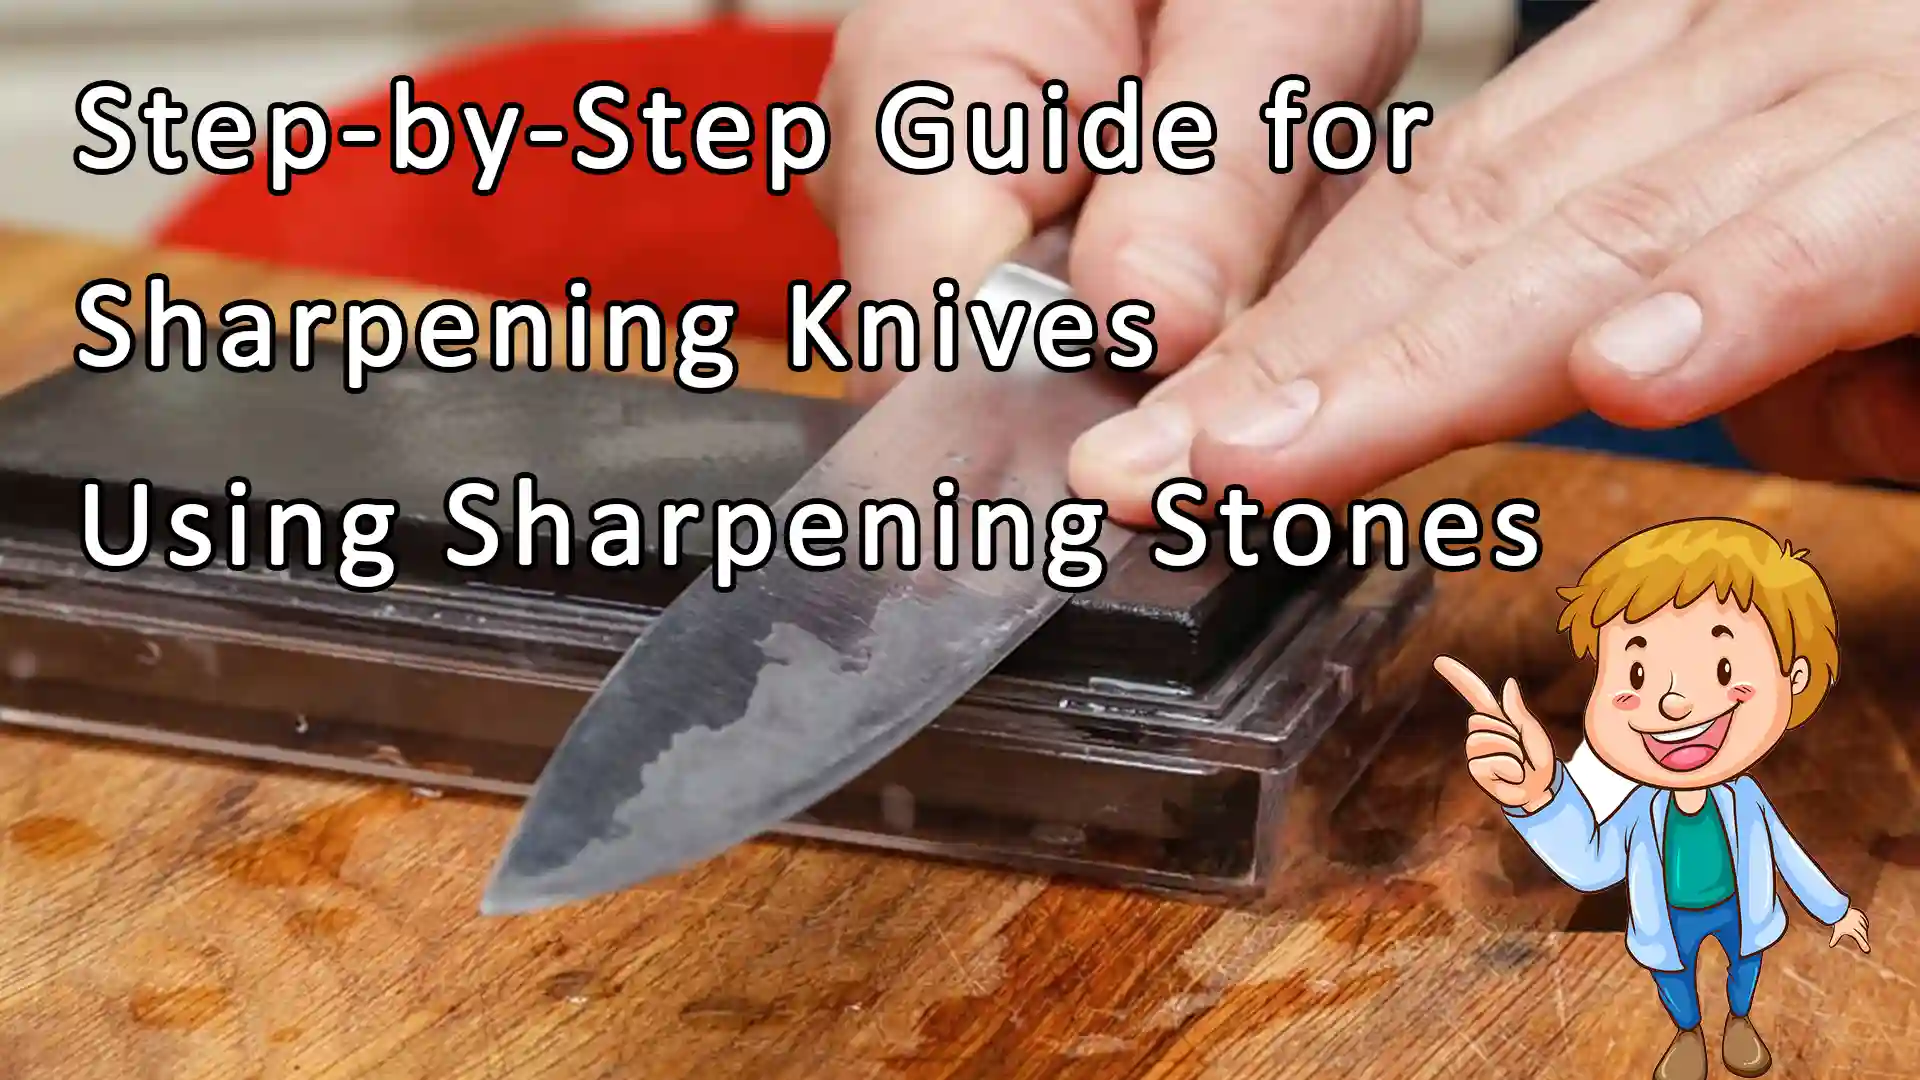 Step-by-Step Guide for Sharpening Knives Using Stones